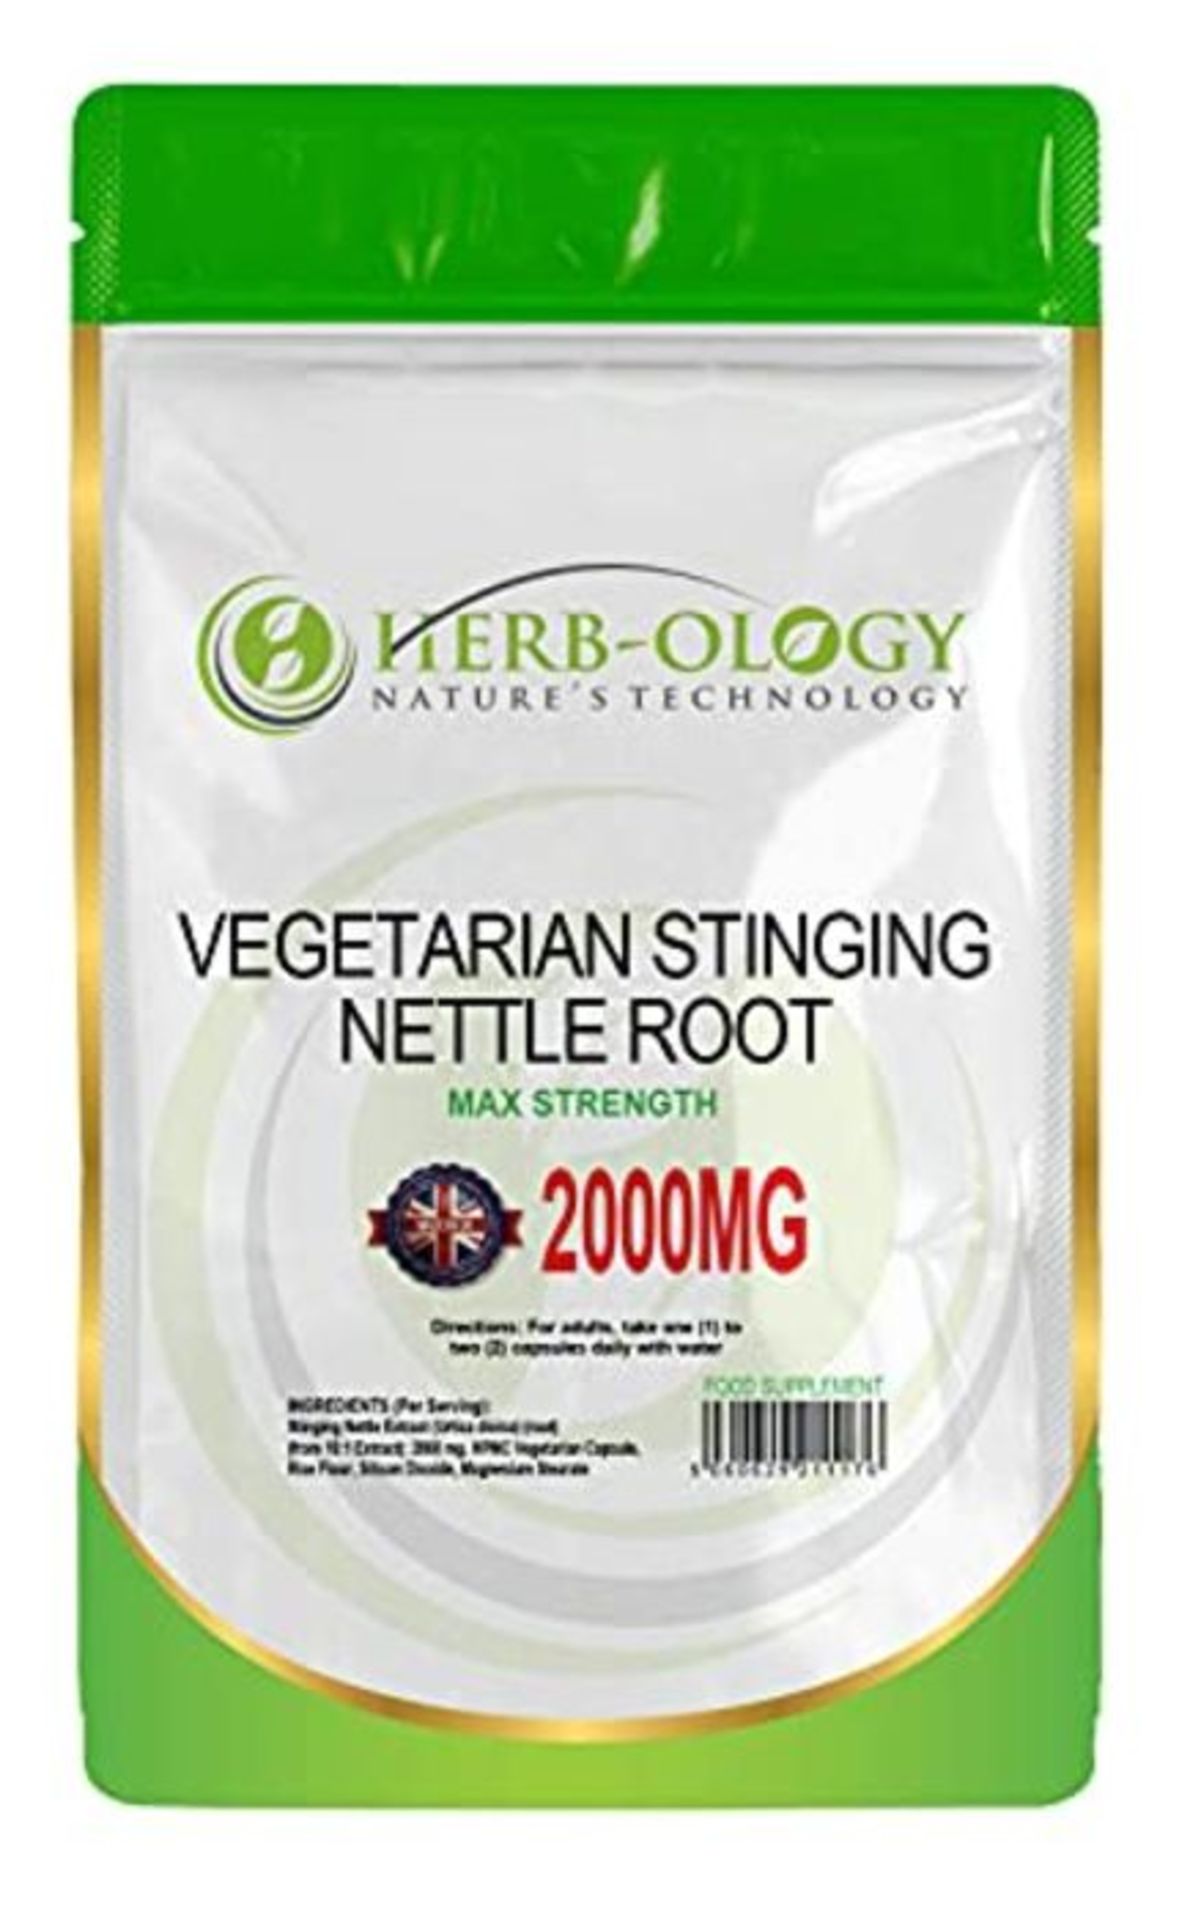 Herb-Ology Stinging Nettle Root Capsules | 120 Nettle Root Capsules (10:1 Extract) 200